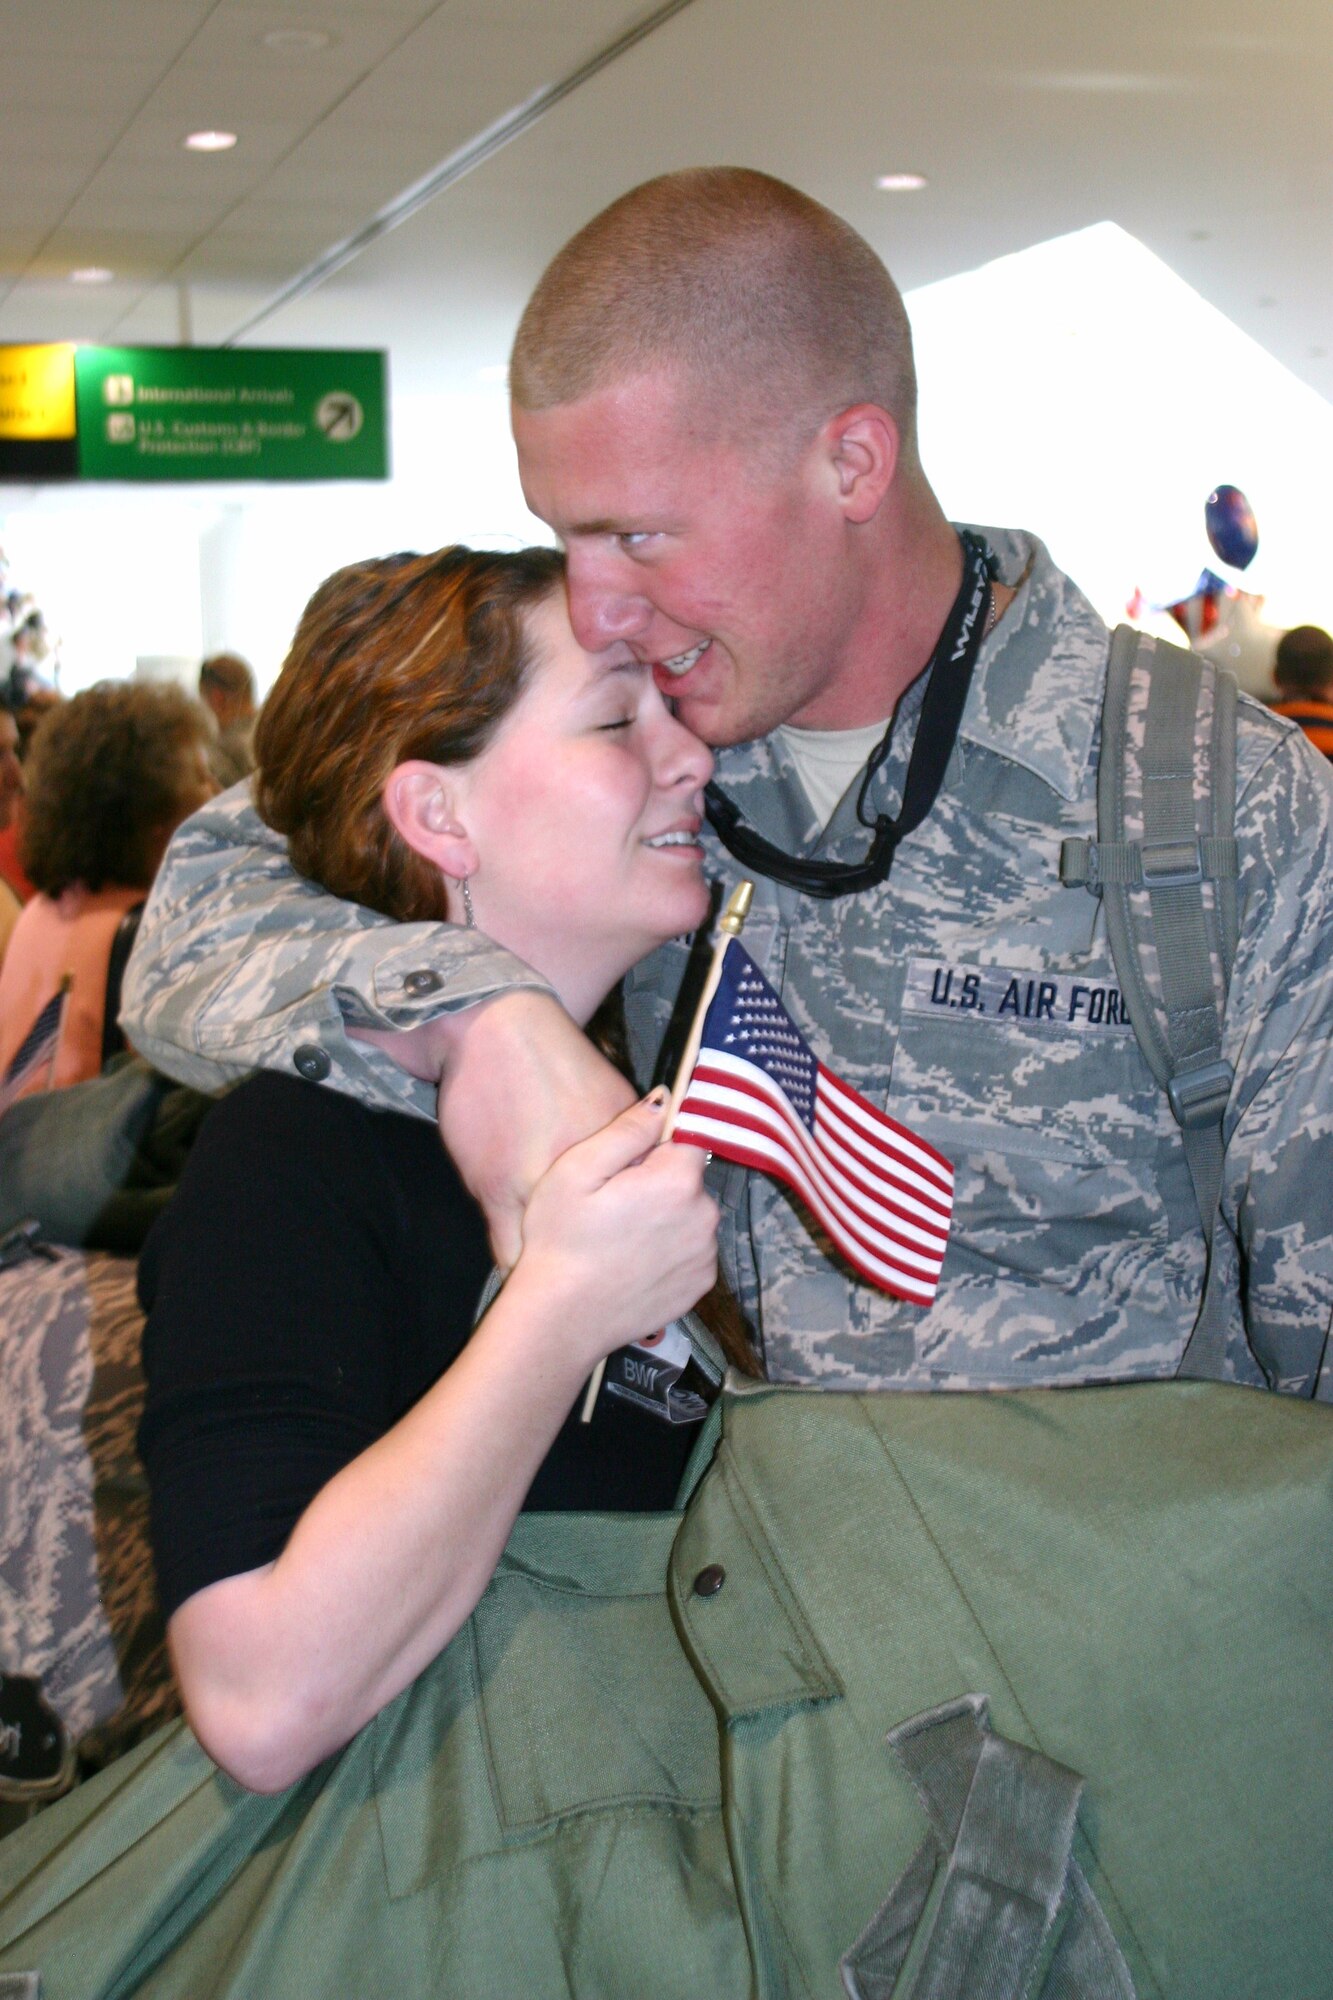 Senior Airman Jesse Terry an avionics technician with the 104th Fighter Squadron, Maryland Air National Guard, embraces his girlfriend, Amelia Young, at Baltimore Washington International Thurgood Marshall Airport March 20, 2010. Airman Terry and 147 other members of Maryland Air Guard were welcomed home from Afghanistan Saturday by Ms. Young and hundreds of other well wishers. His unit flew close air support combat sorties in Afganistan with the A-10C Thunderbolt II. (U.S. Air Force photo by Tech. Sgt. David Speicher/Released)